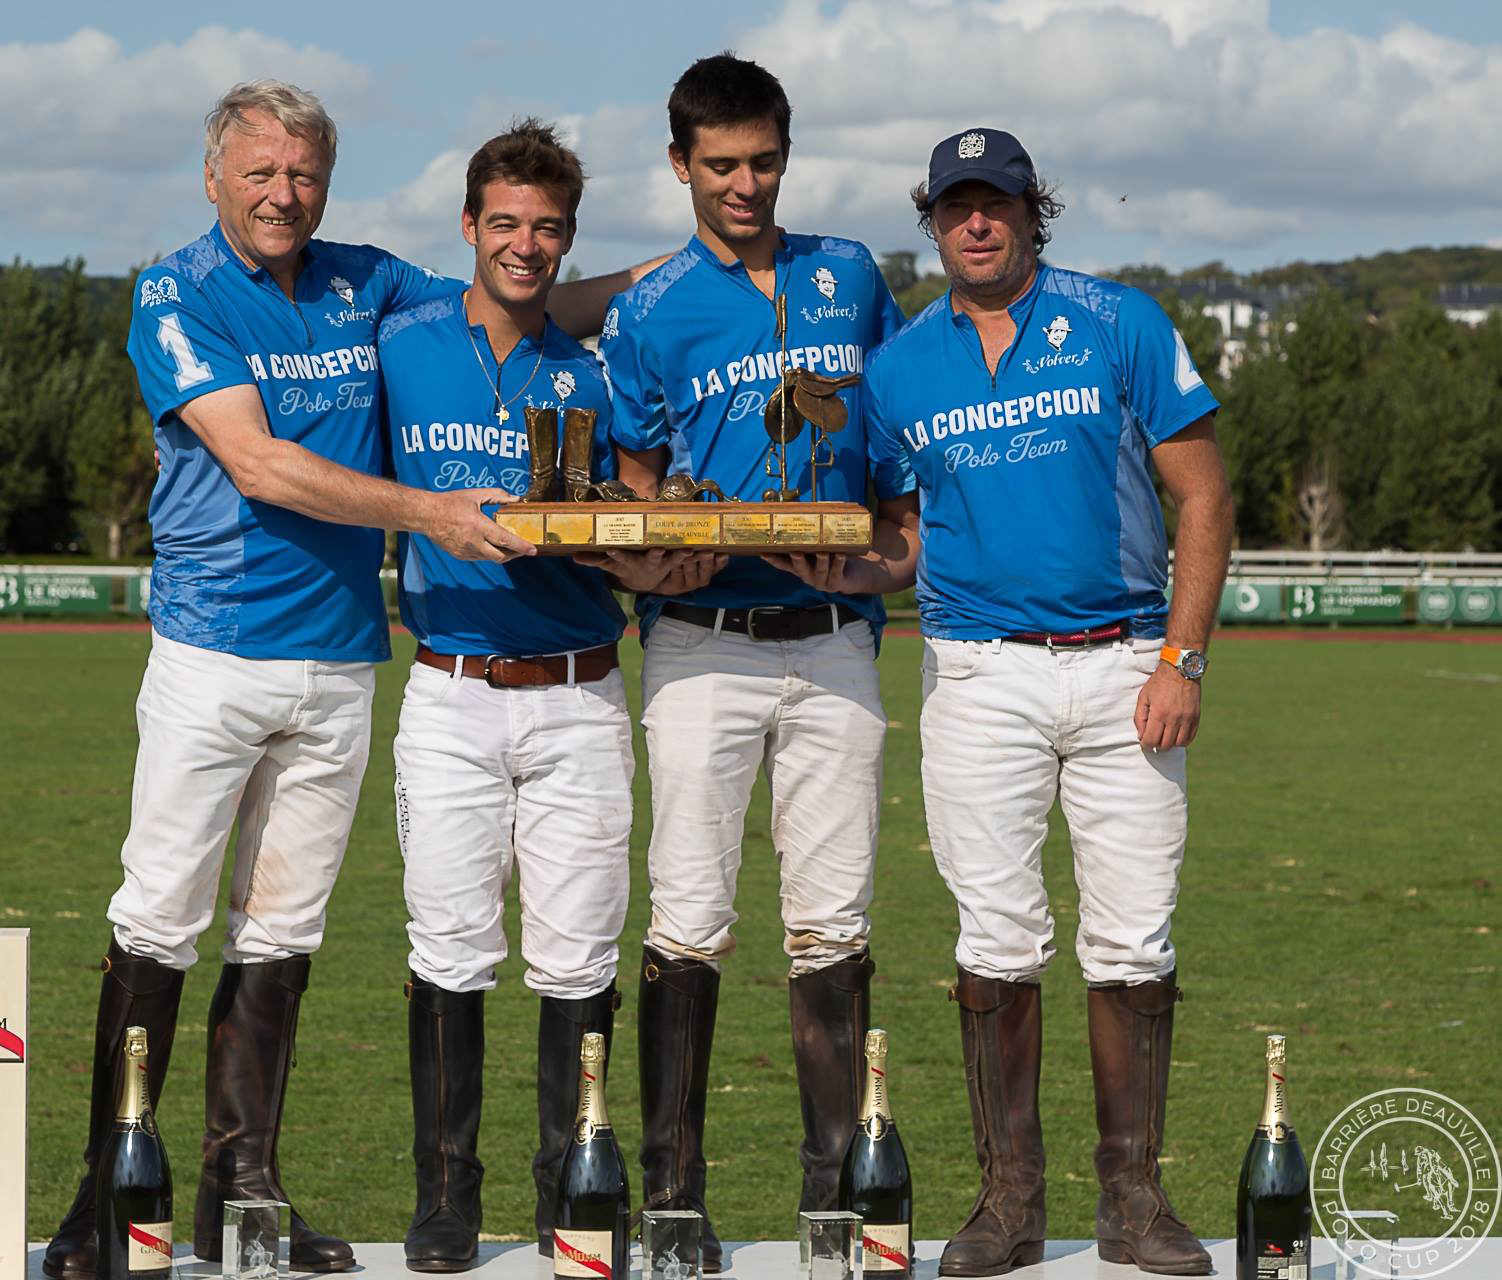 COUPE D'OR 2018,Coupe D Bronze, Deauville 2018,Duke of Cornwall Trophy 2018,Polo at Berlin Again,Royal Malaysian Polo Association League 2018,Guards Ladies' Charity Tournament for the Lord Patrick Beresford Trophy 2018,Flemish Farm Trophy,47 INTERNATIONAL POLO TOURNAMENT Santa María Polo Club